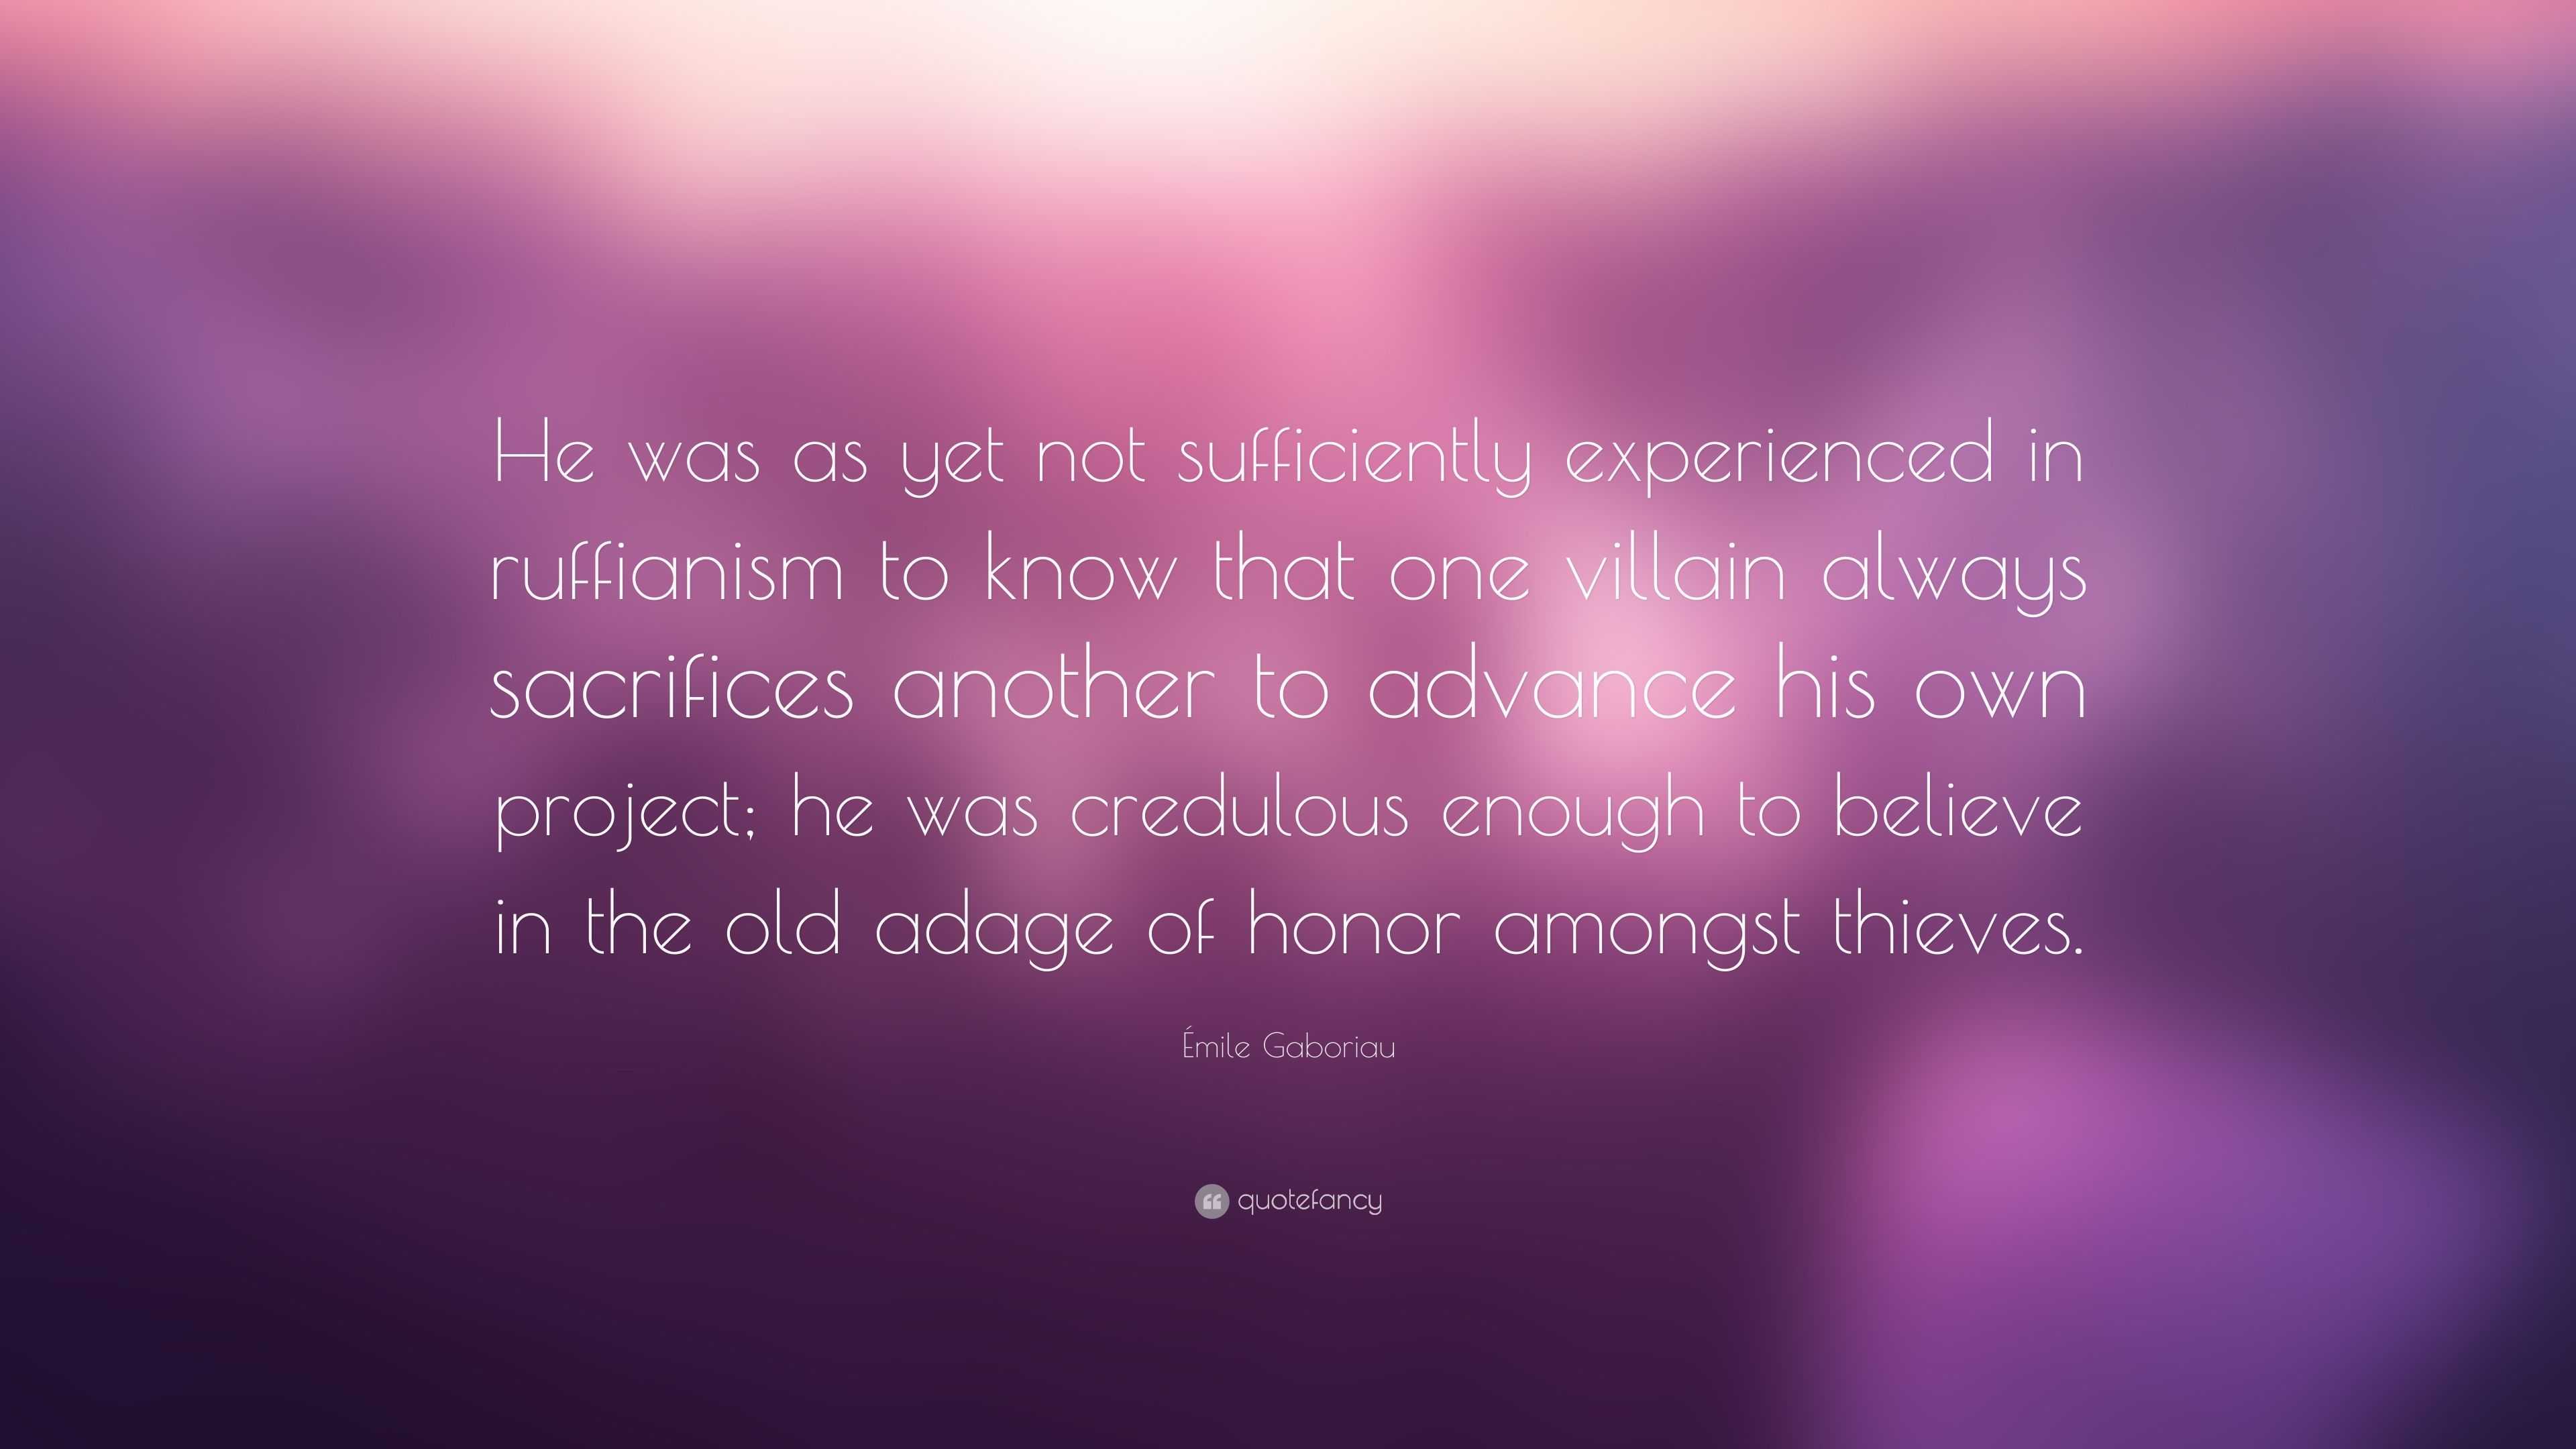 Émile Gaboriau Quote: “He was as yet not sufficiently experienced in ...